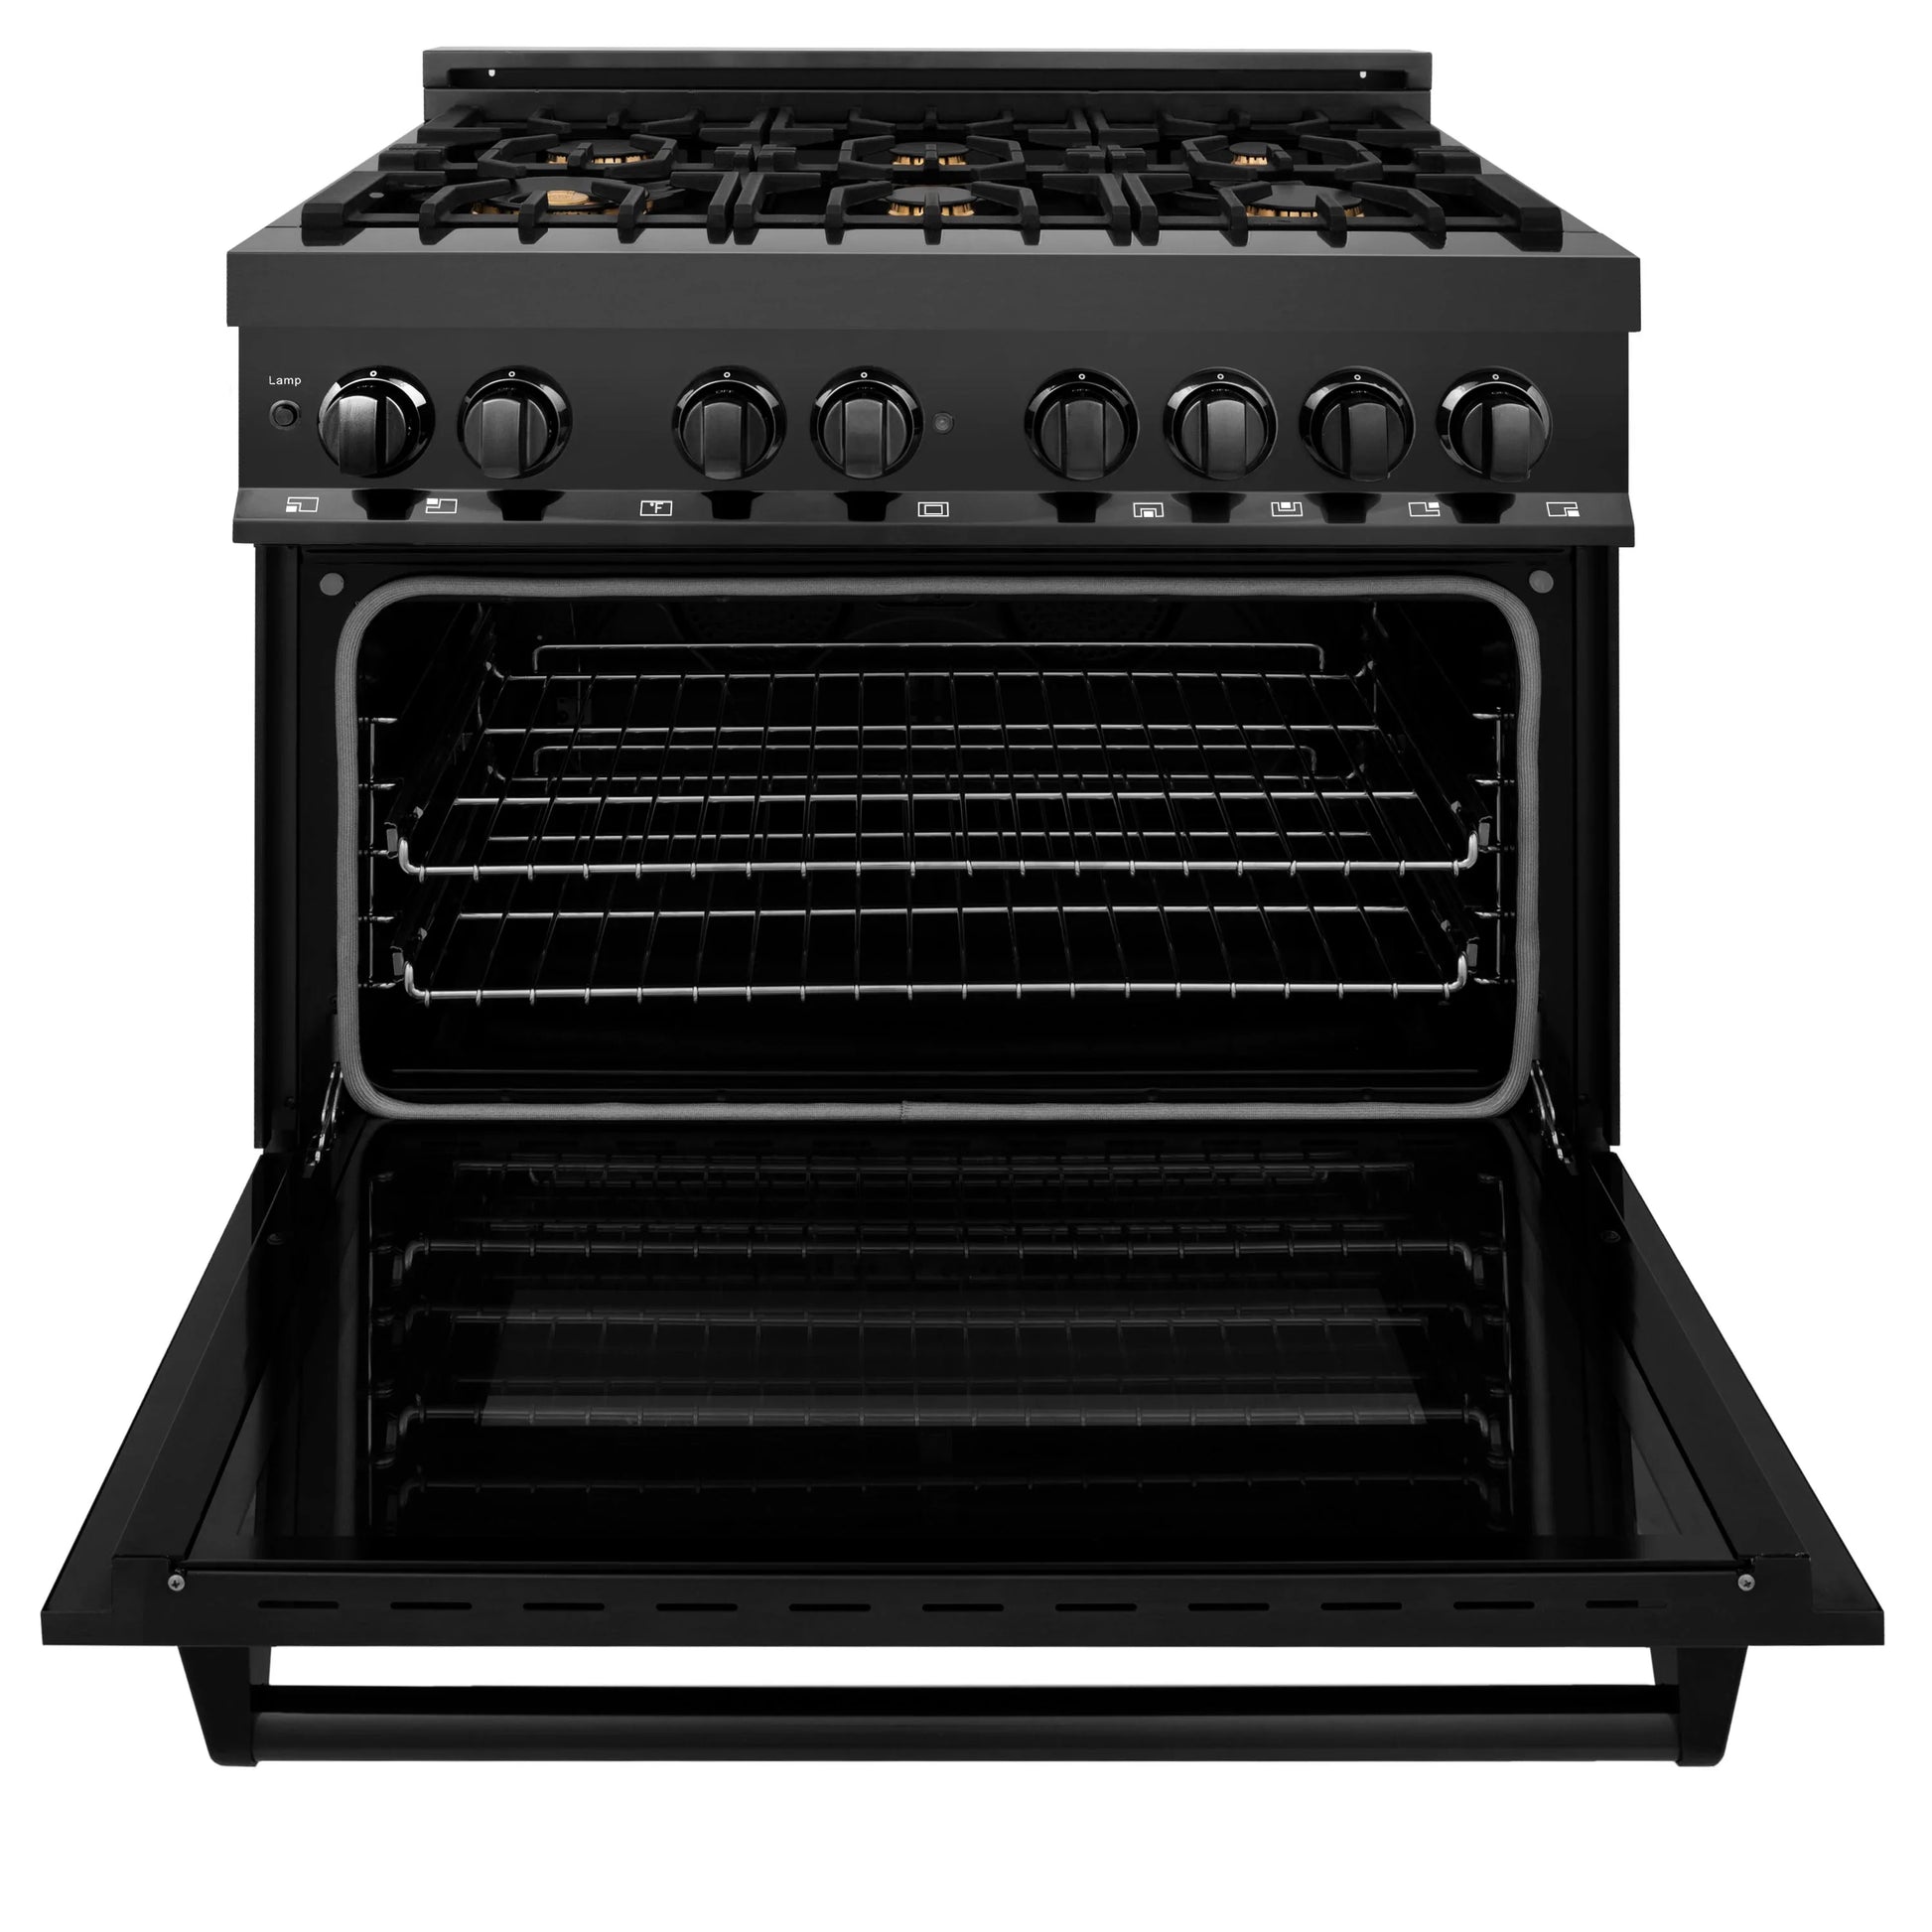 ZLINE 36" Dual Fuel Range - Black Stainless Steel with Brass Burners, Gas Stove, and Electric Oven